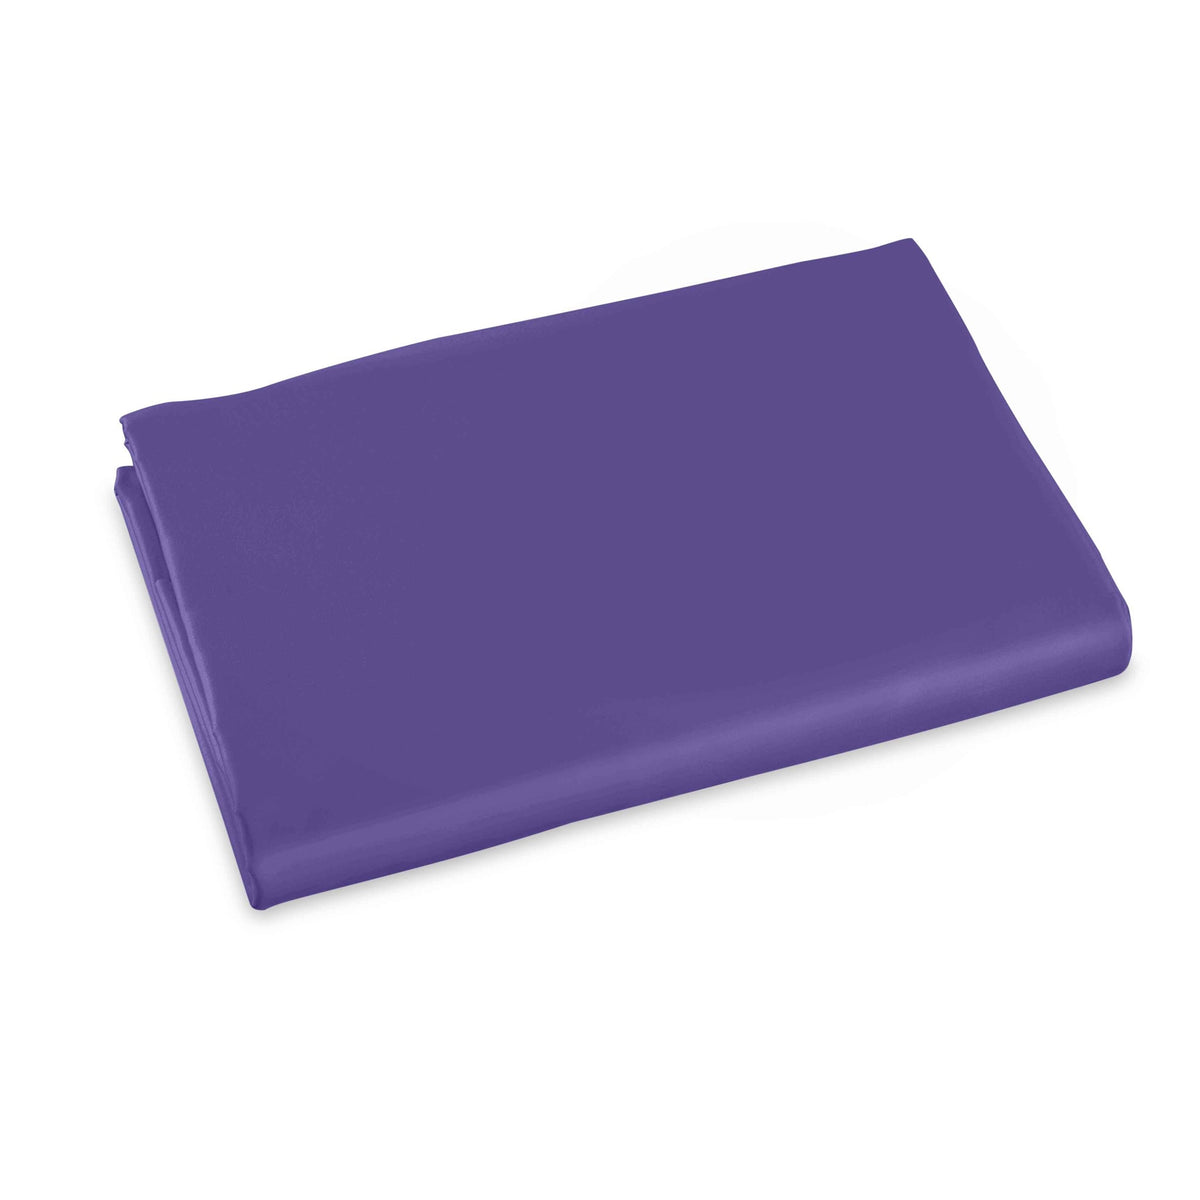 Clear Image of Signoria Raffaello Fitted Sheet in Violet Color